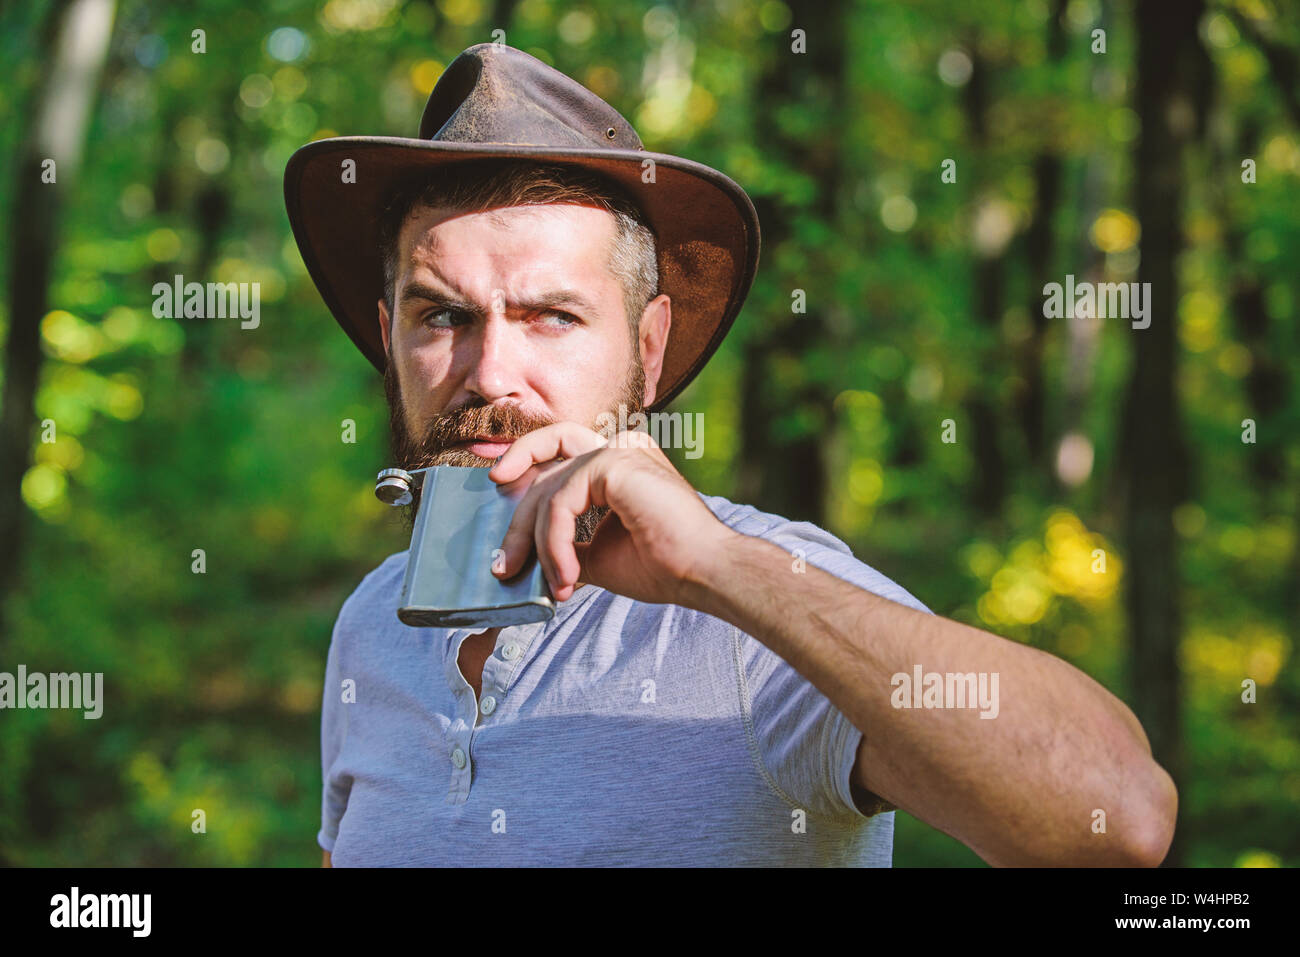 man hipster relax in autumn forest. Spring sunny weather. camping and hiking. mature male with brutal look drink alcohol from metallic flask. Bearded man in cowboy hat walk in park outdoor. Stock Photo